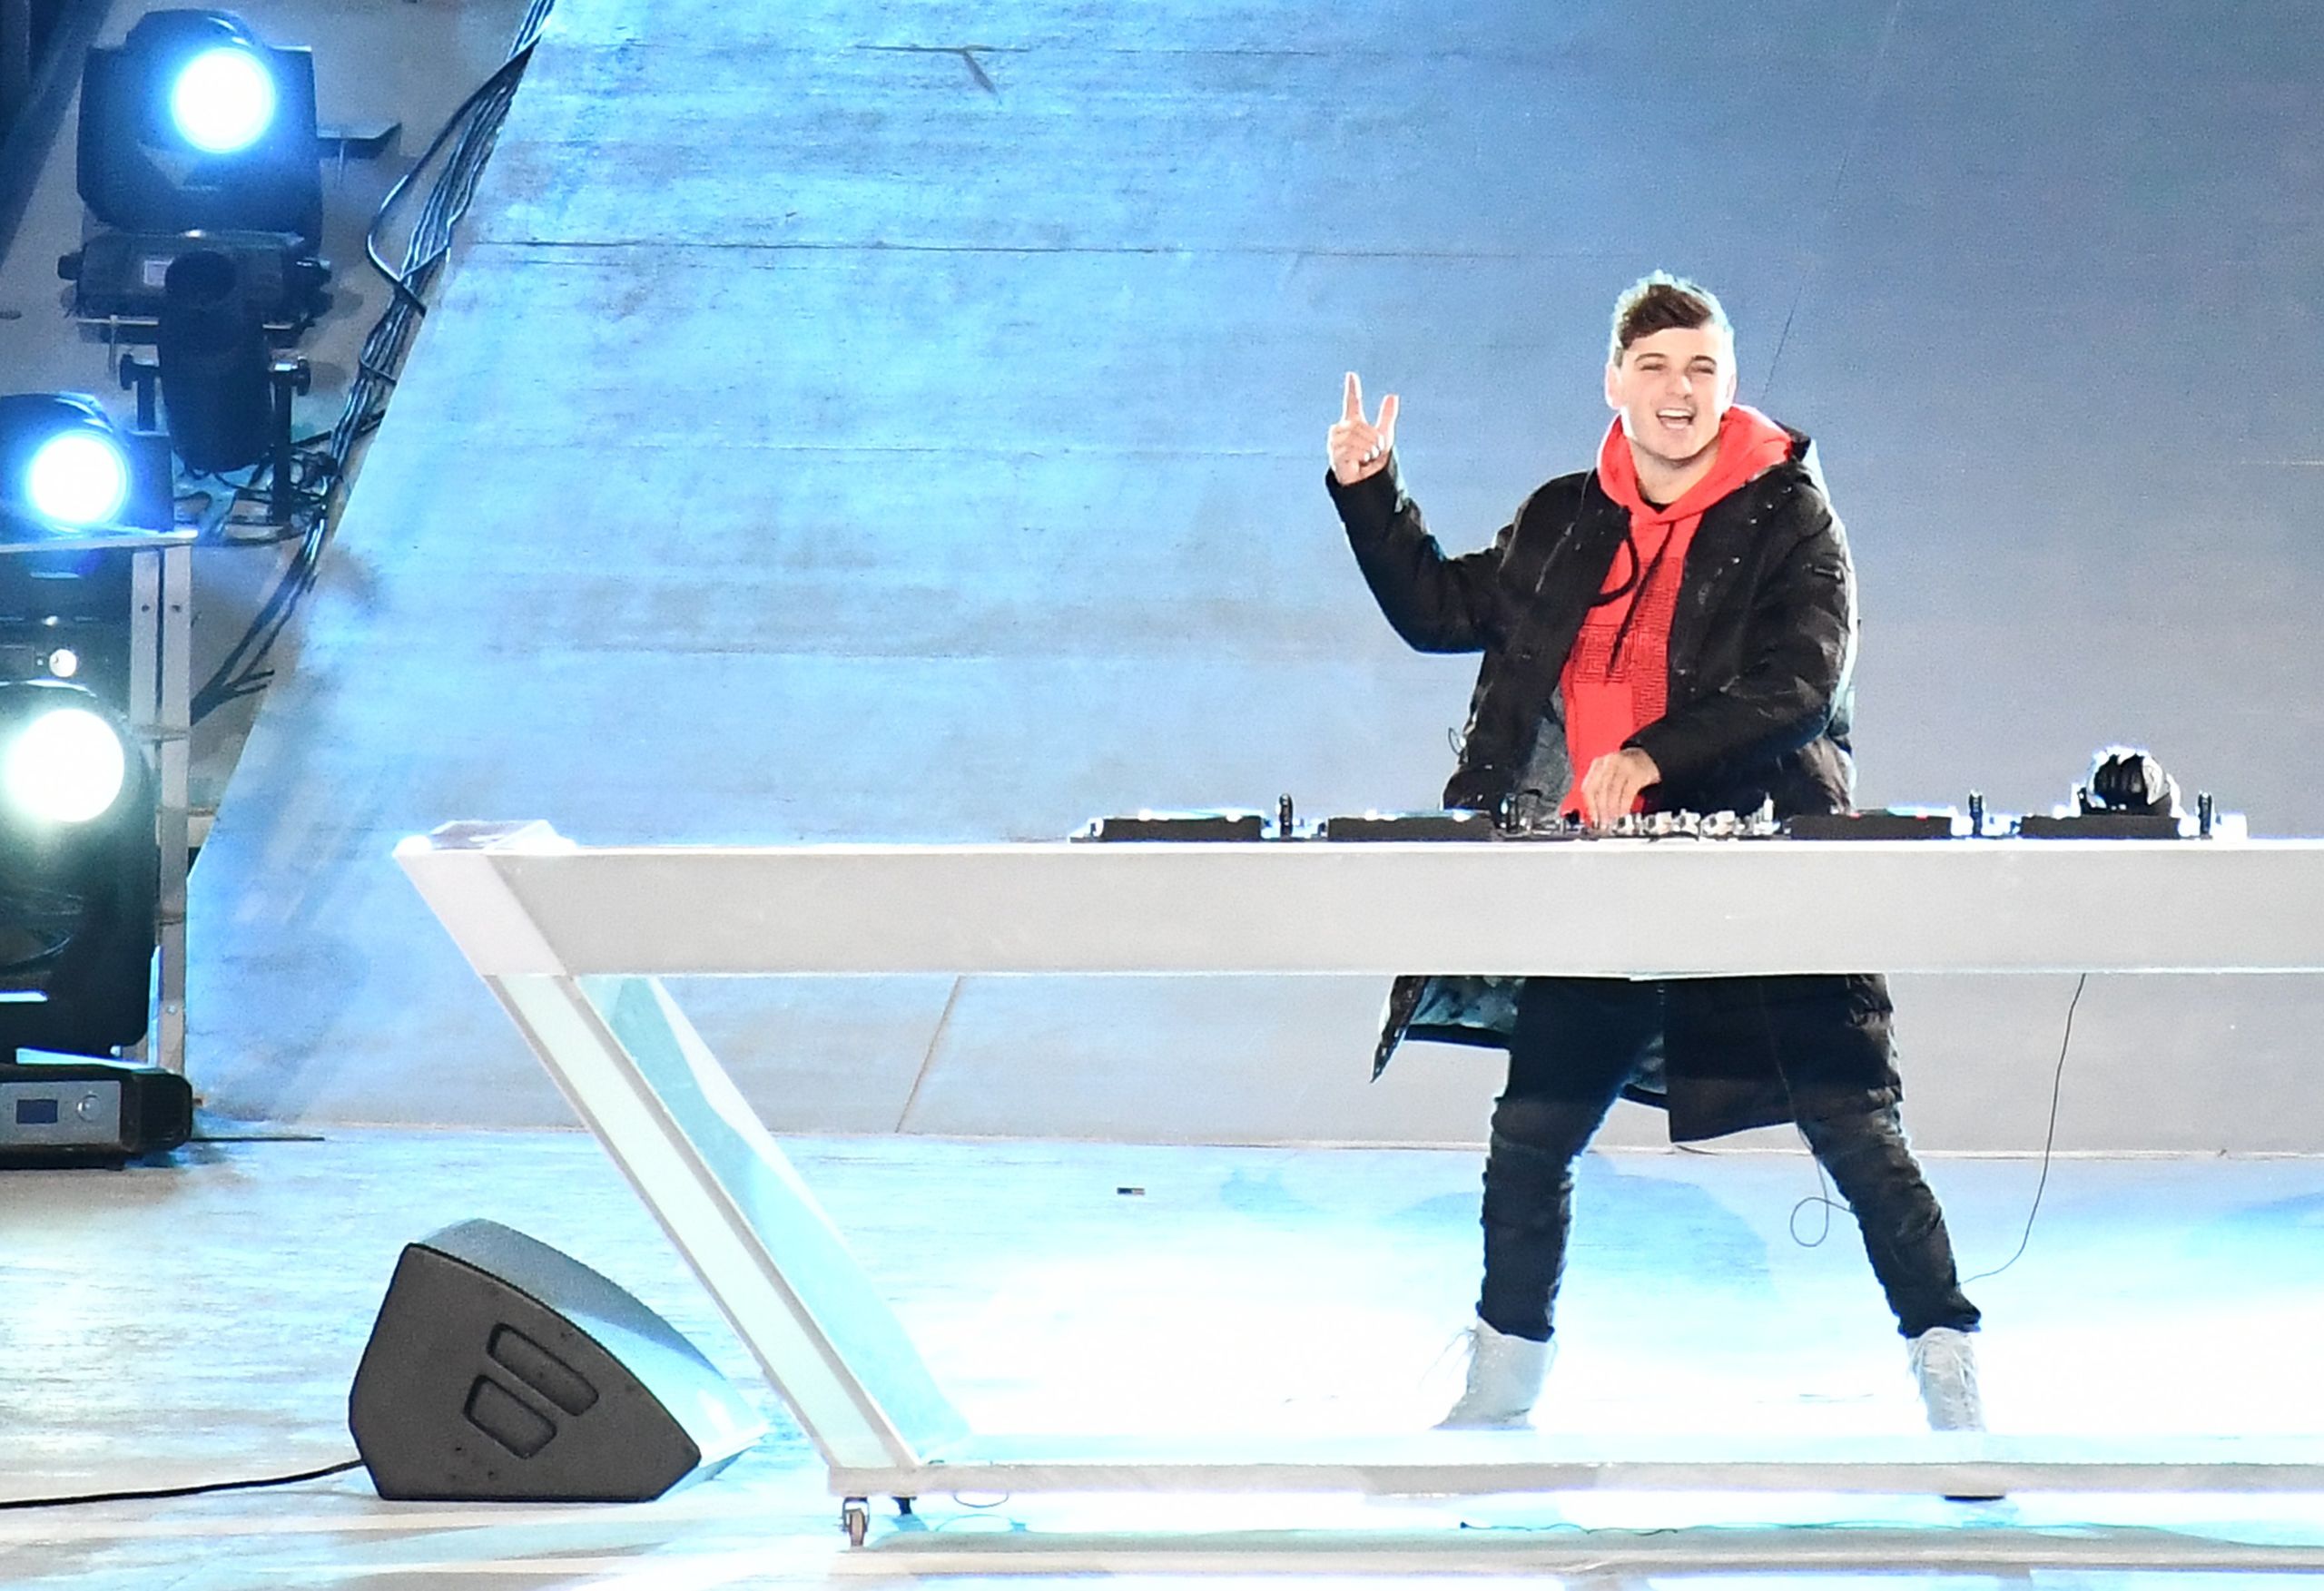 2018-02-25 22:57:53 epa06564245 DJ Martin Garrix from the Netherlands performs during the Closing Ceremony of the PyeongChang 2018 Olympic Games, Pyeongchang county, South Korea, 25 February 2018.  EPA/CHRISTIAN BRUNA